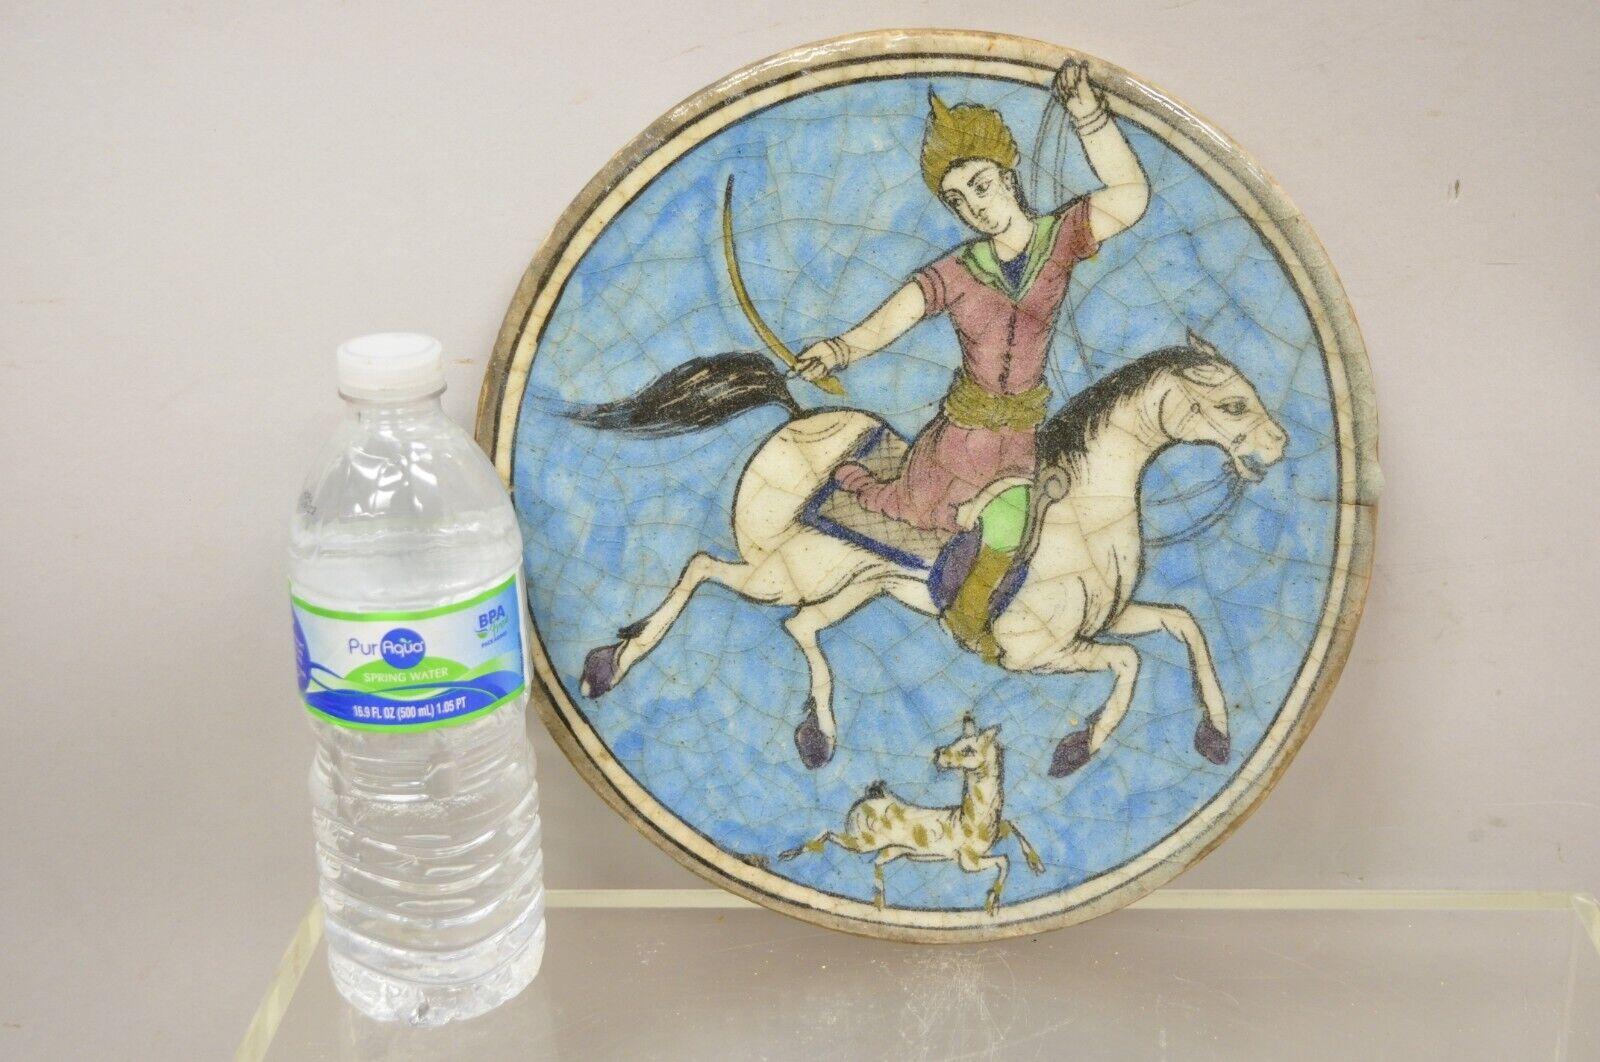 Antique Persian Iznik Qajar Style Ceramic Pottery Round Tile Blue Horse Rider C4. Item features original crackle glazed finish, heavy ceramic pottery construction, very impressive detail, wonderful style and form. Great to mount as wall art or